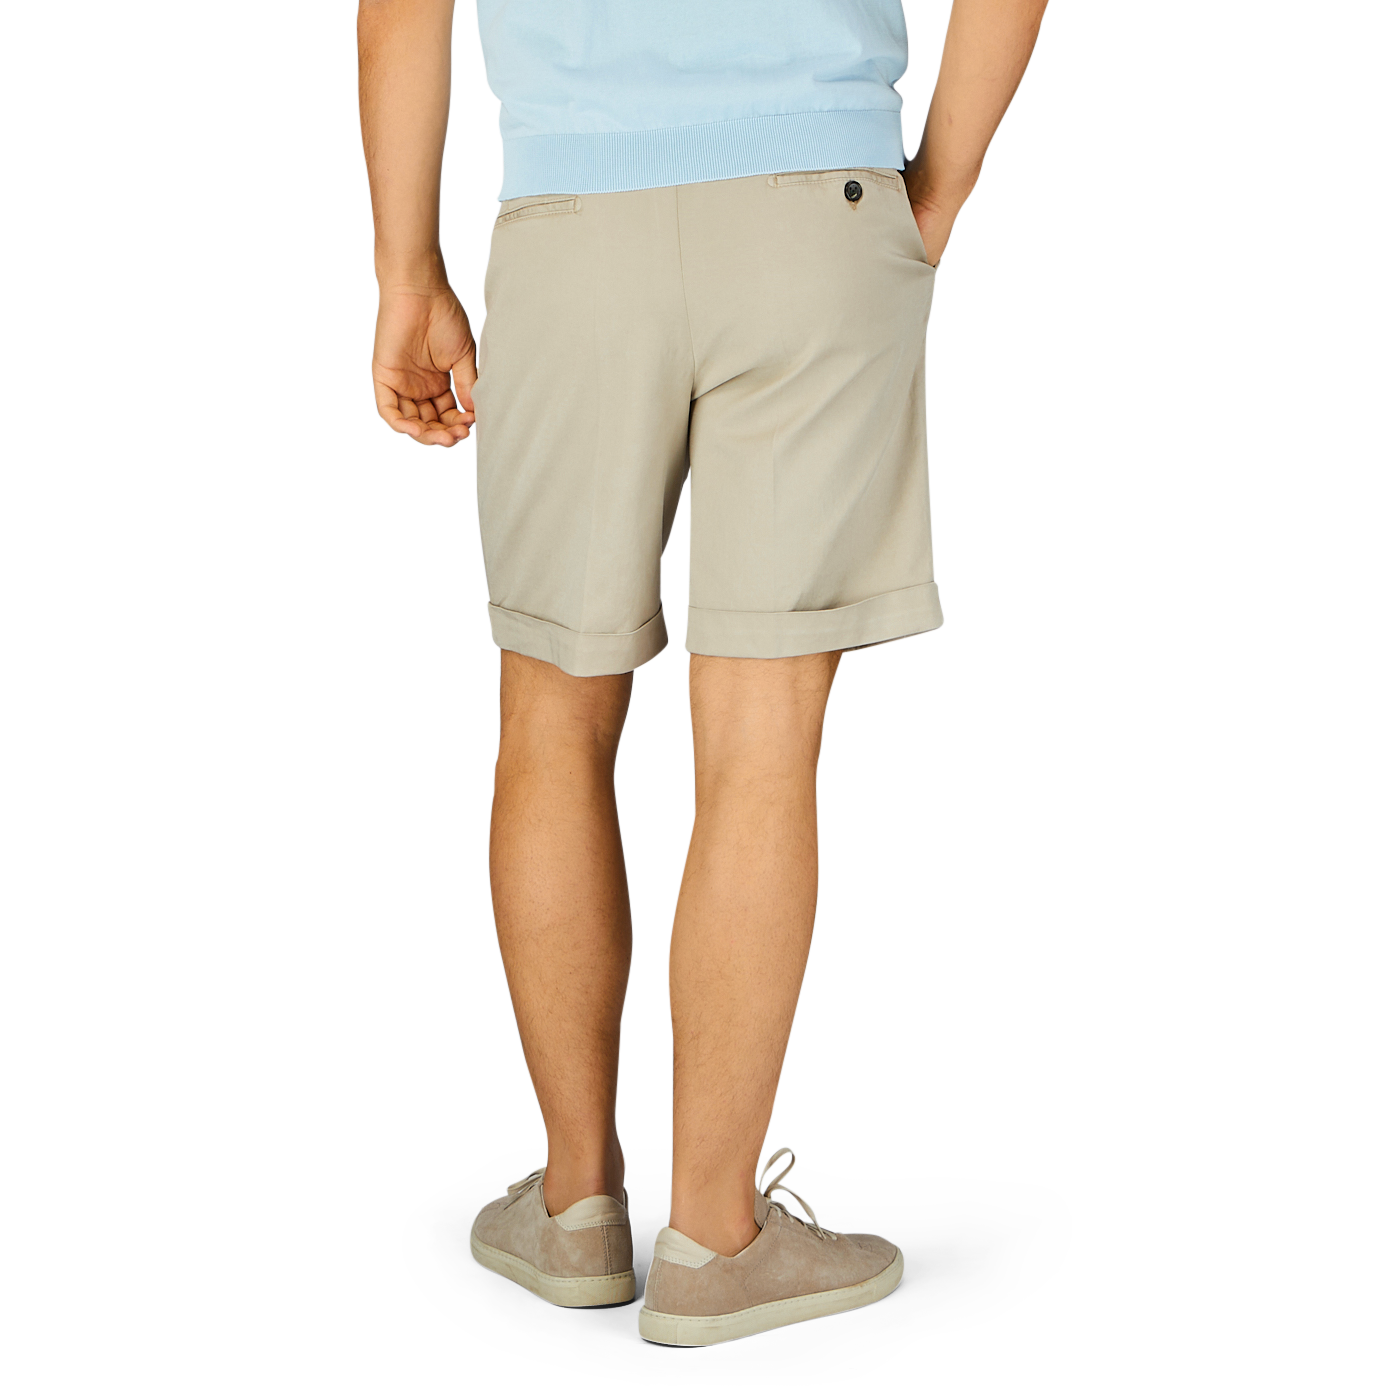 Man standing in Sabbia Beige Cotton Blend Pleated Shorts by Berwich and light-colored sneakers against a blue background.